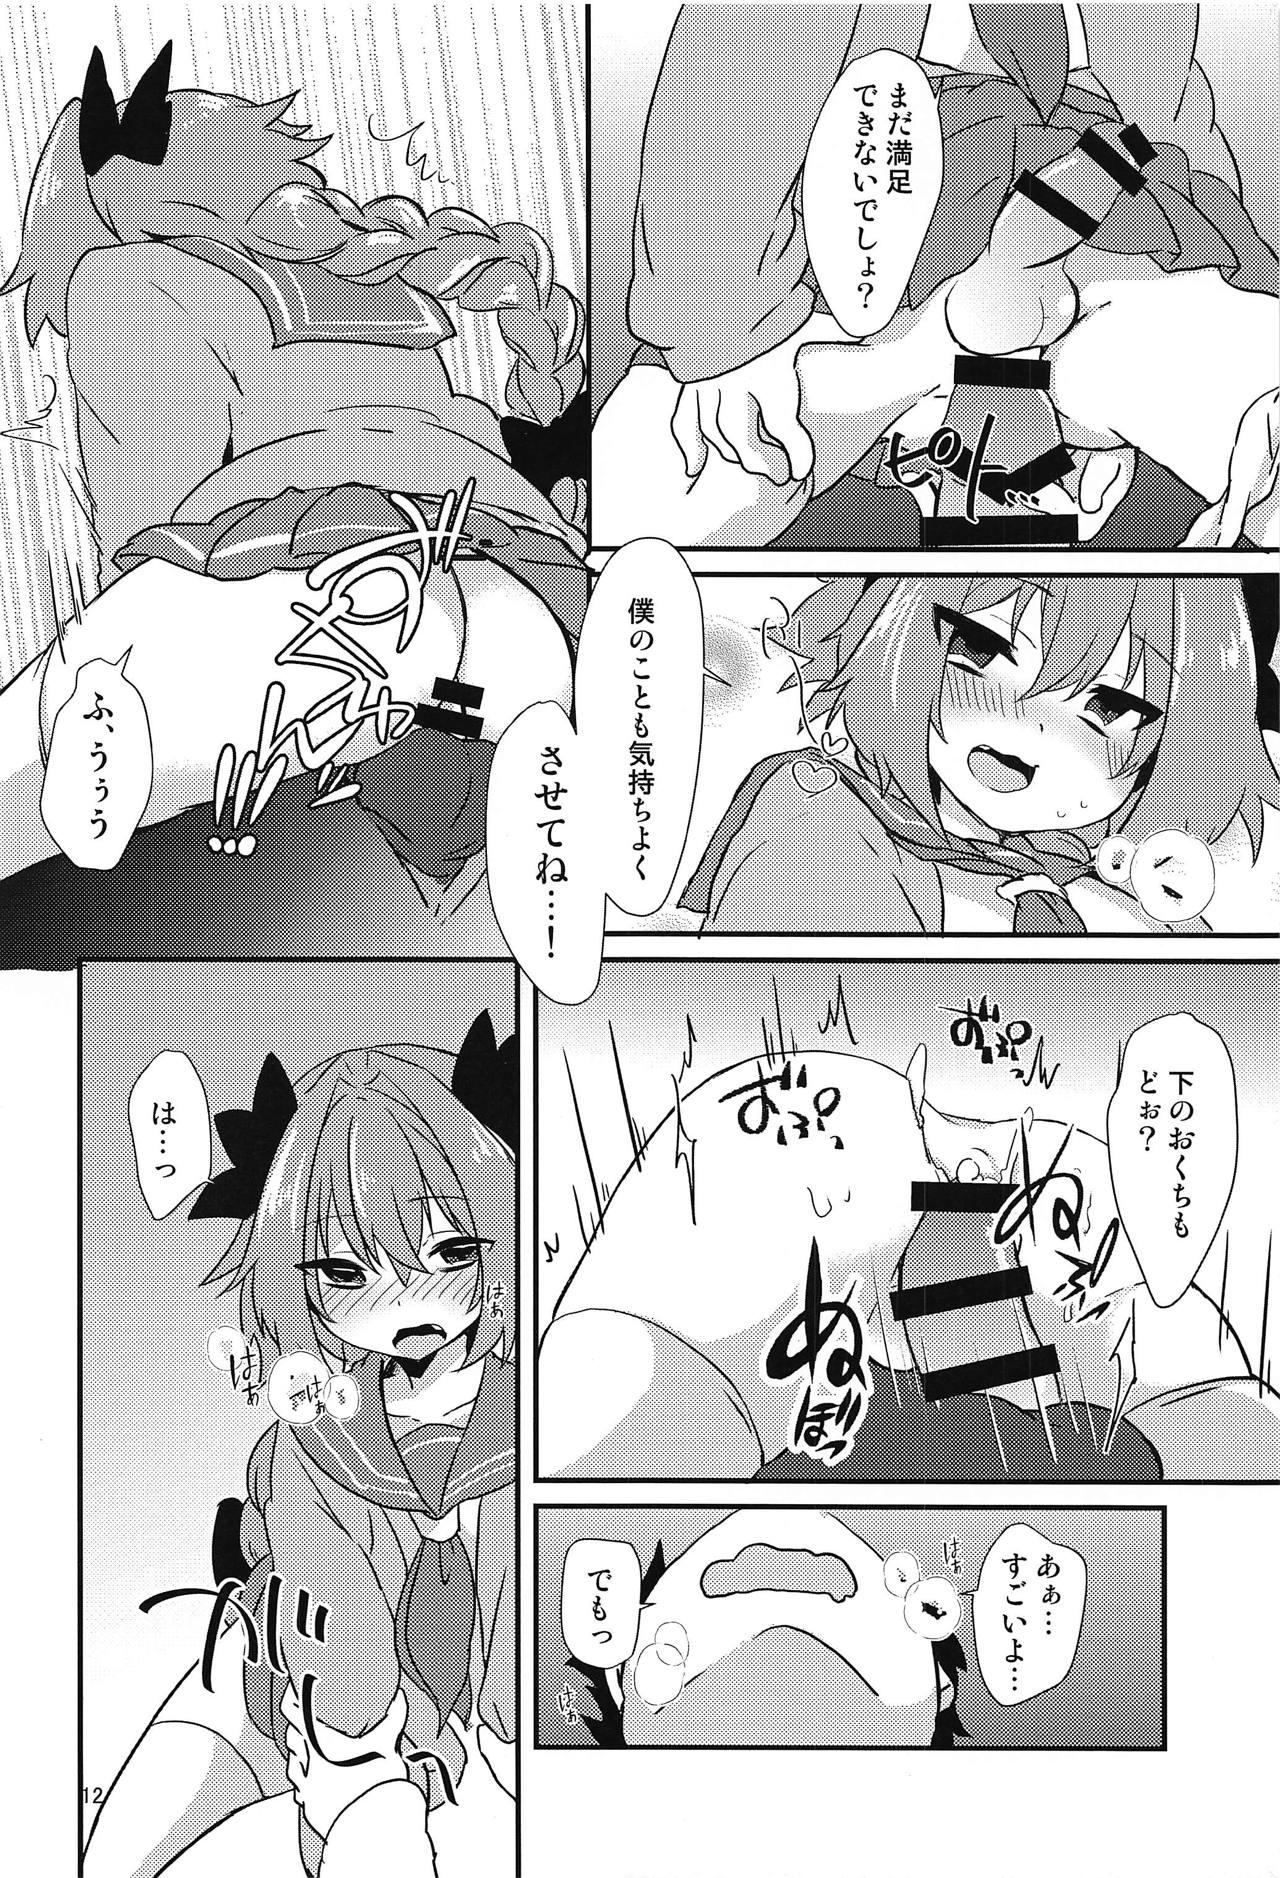 Fitness Astolfo to H na Gokko Asobi - Fate grand order Sharing - Page 10